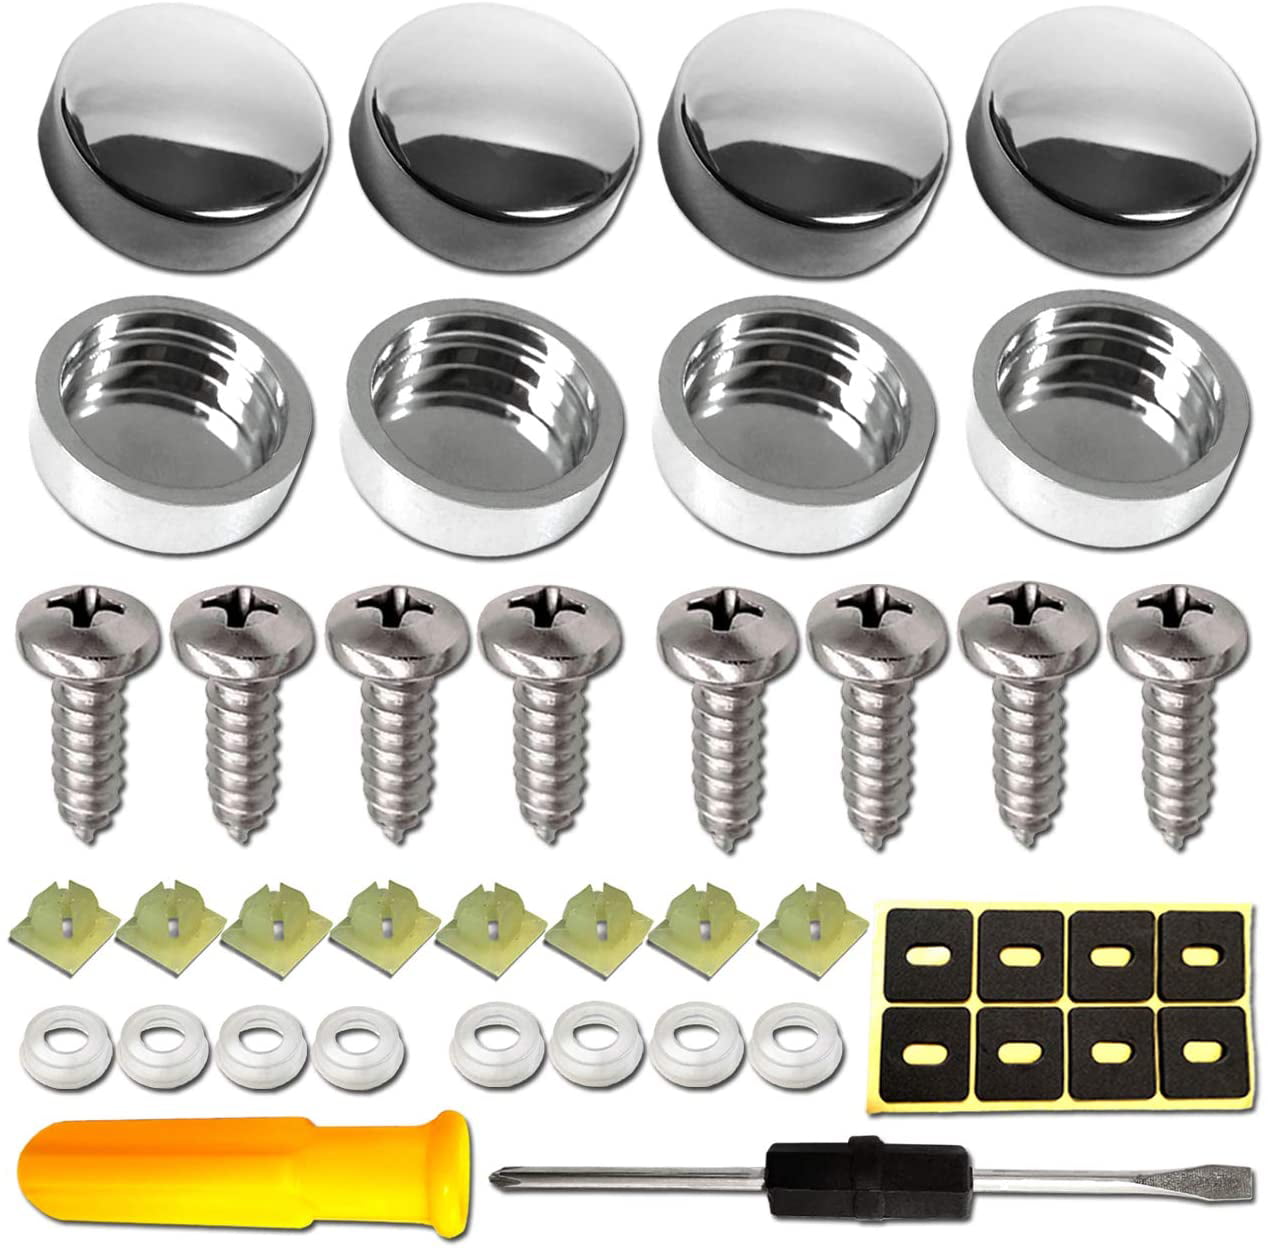 OEM Replacement Auto License Plate Screws Stainless Steel bolts for Tesla 